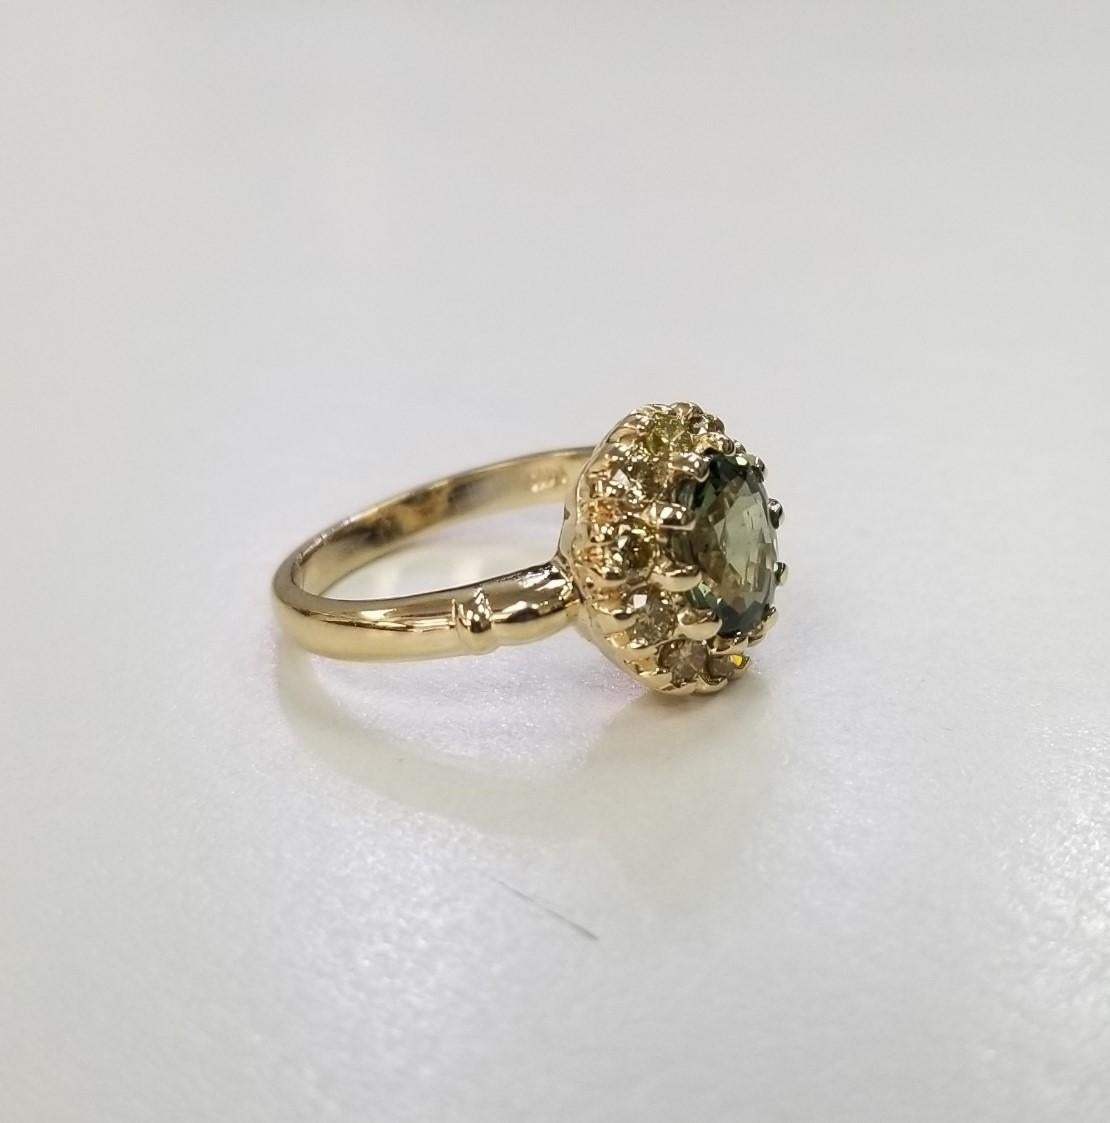 14 karat yellow gold Green Sapphire yellow diamond halo ring, containing 1 oval green sapphire of gem quality weighing 1.54cts.  and 10 round full cut yellow diamonds of very fine quality weighing .55pts.  This ring is a size 7 but we will size to